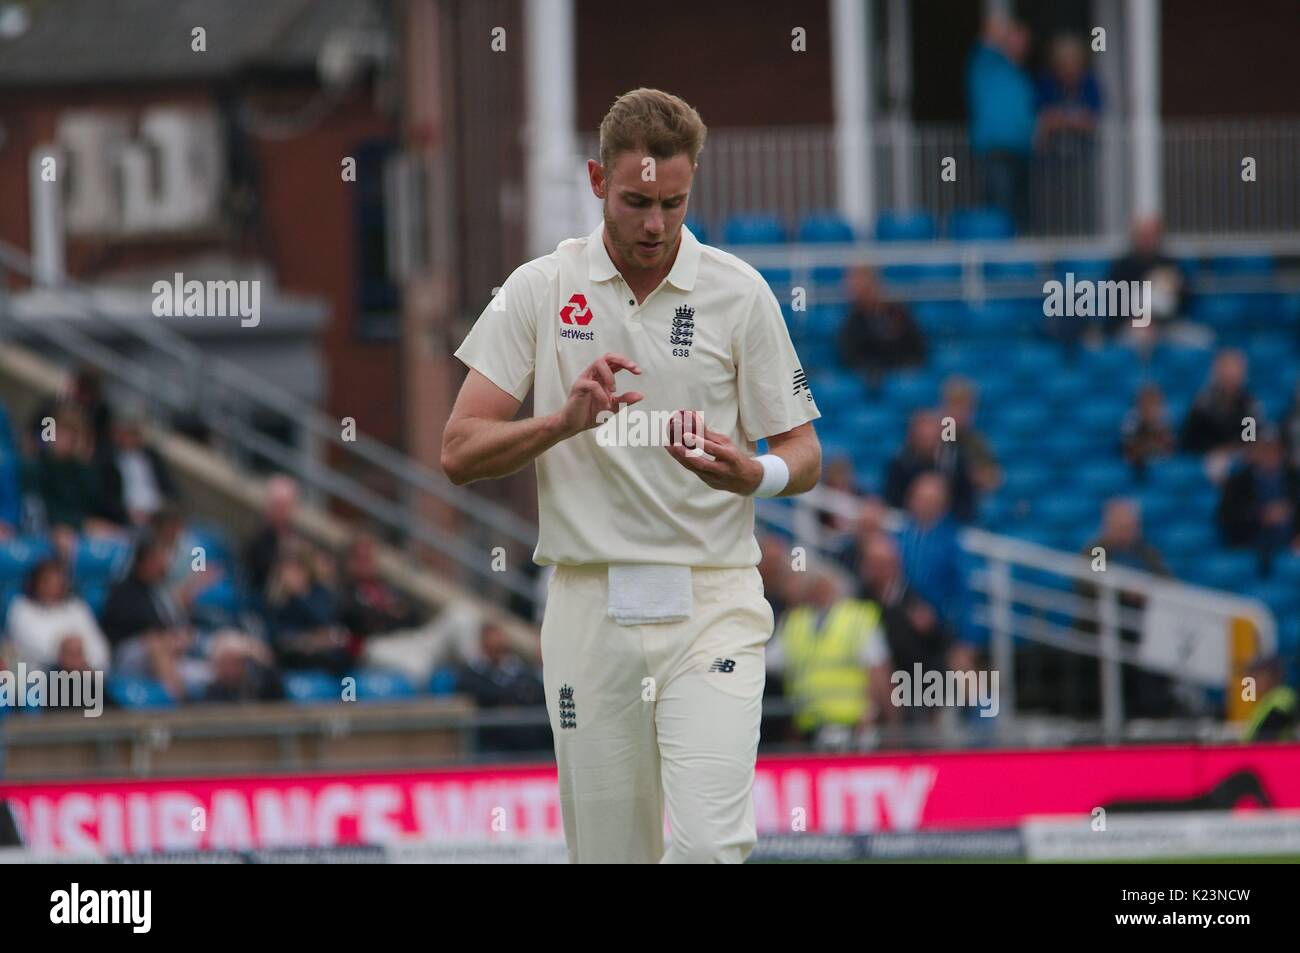 Leeds, UK. 29th Aug, 2017. Stuart Broad bowling for England against West Indies on the last day of the second Investec Test Match at Headingley Cricket Ground. Credit: Colin Edwards/Alamy Live News Stock Photo